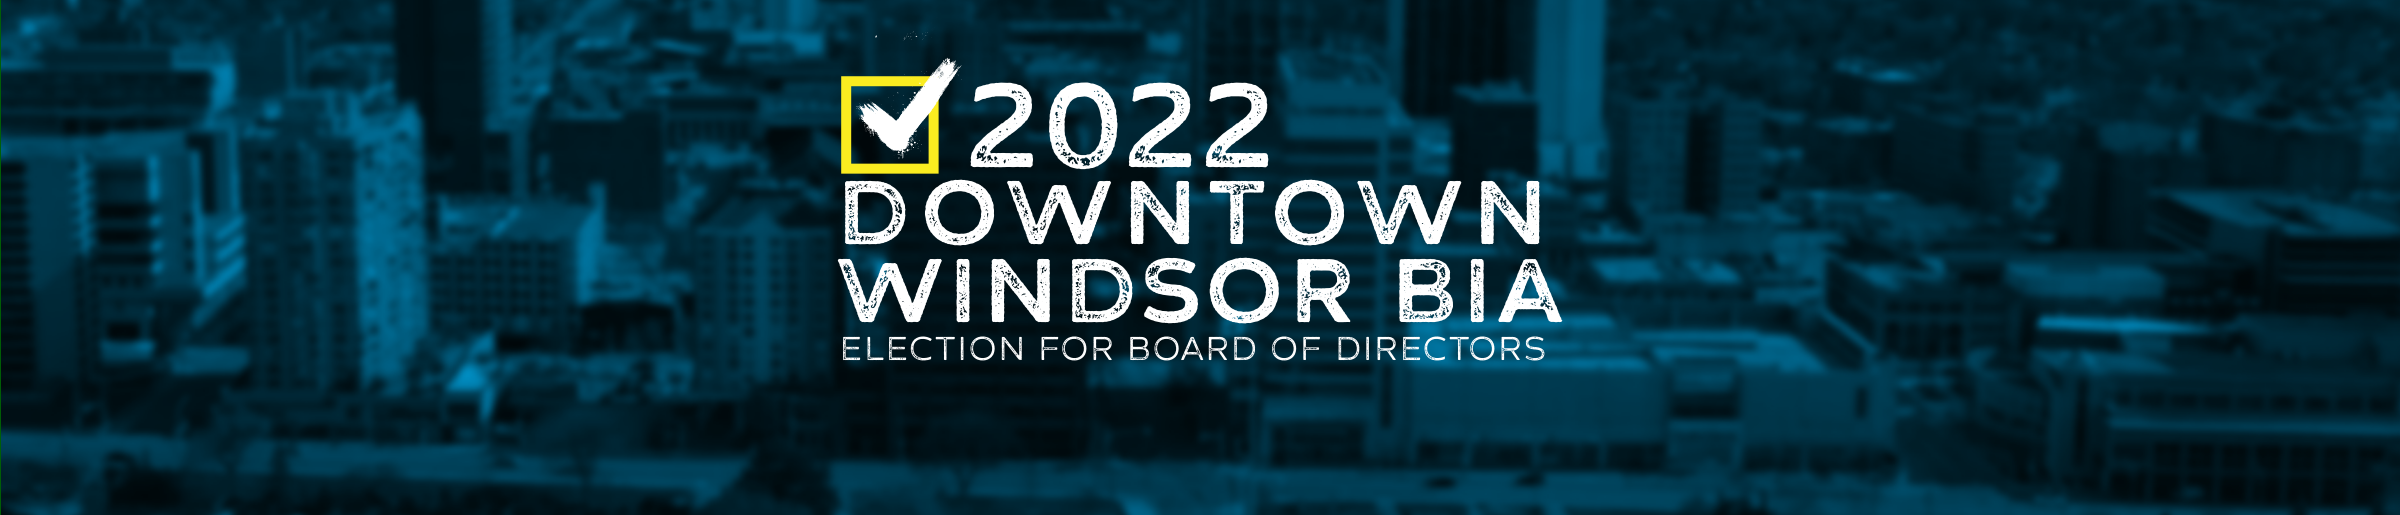 Time to Vote! 2022 Downtown Windsor BIA Election for Board of Directors